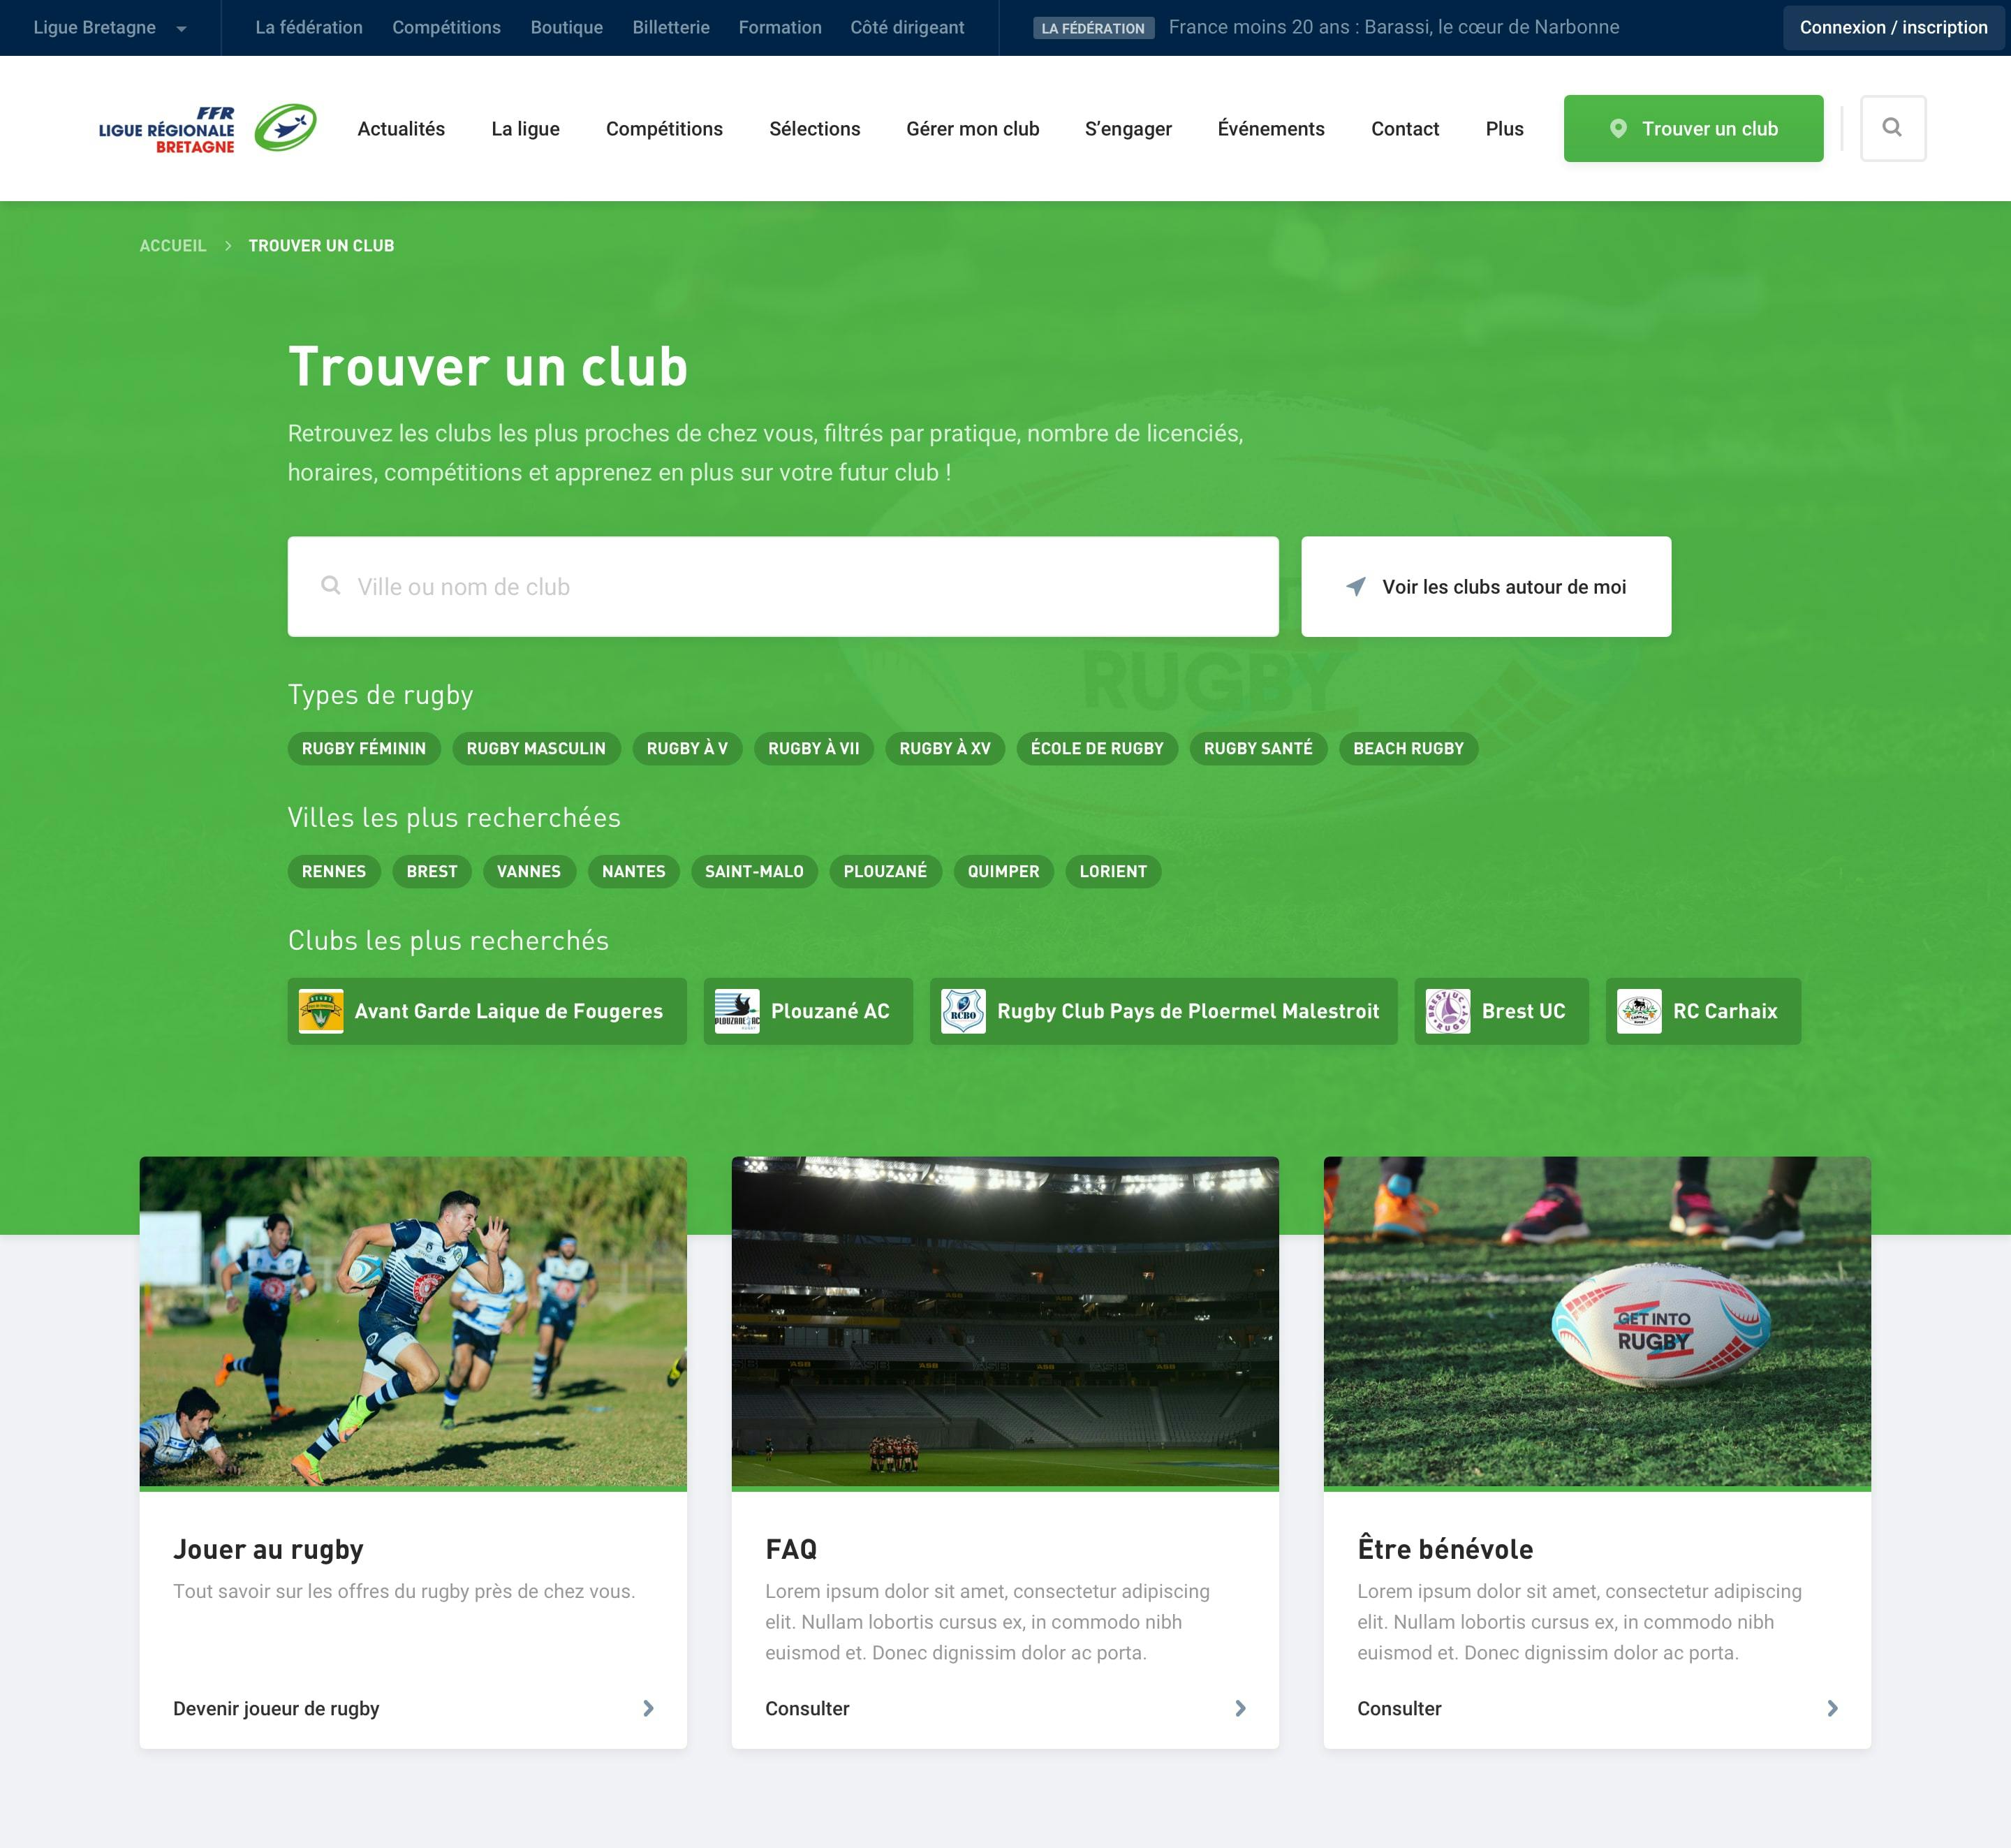 Design of websites for french rugby leagues